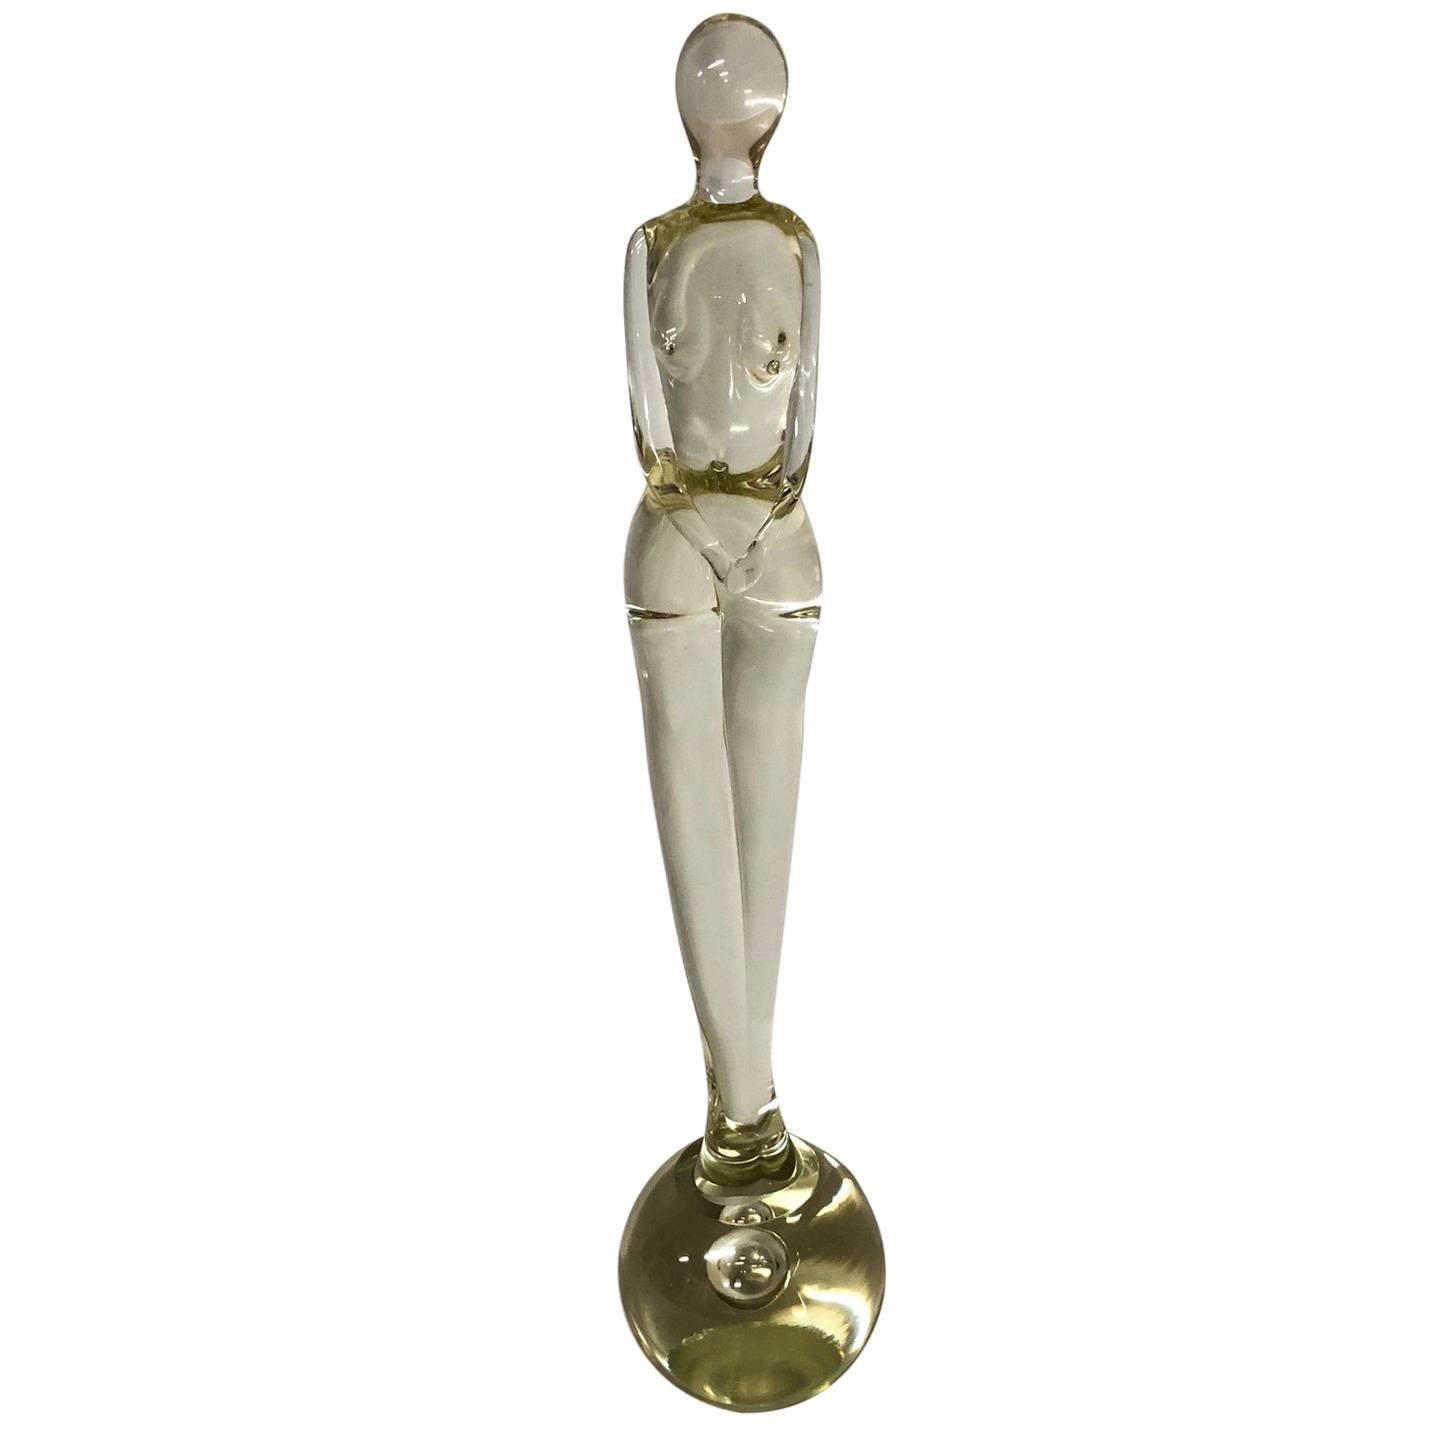 Sleek, Modernist Form Nude Woman Sculpture on Round Glass Base by Murano Glass